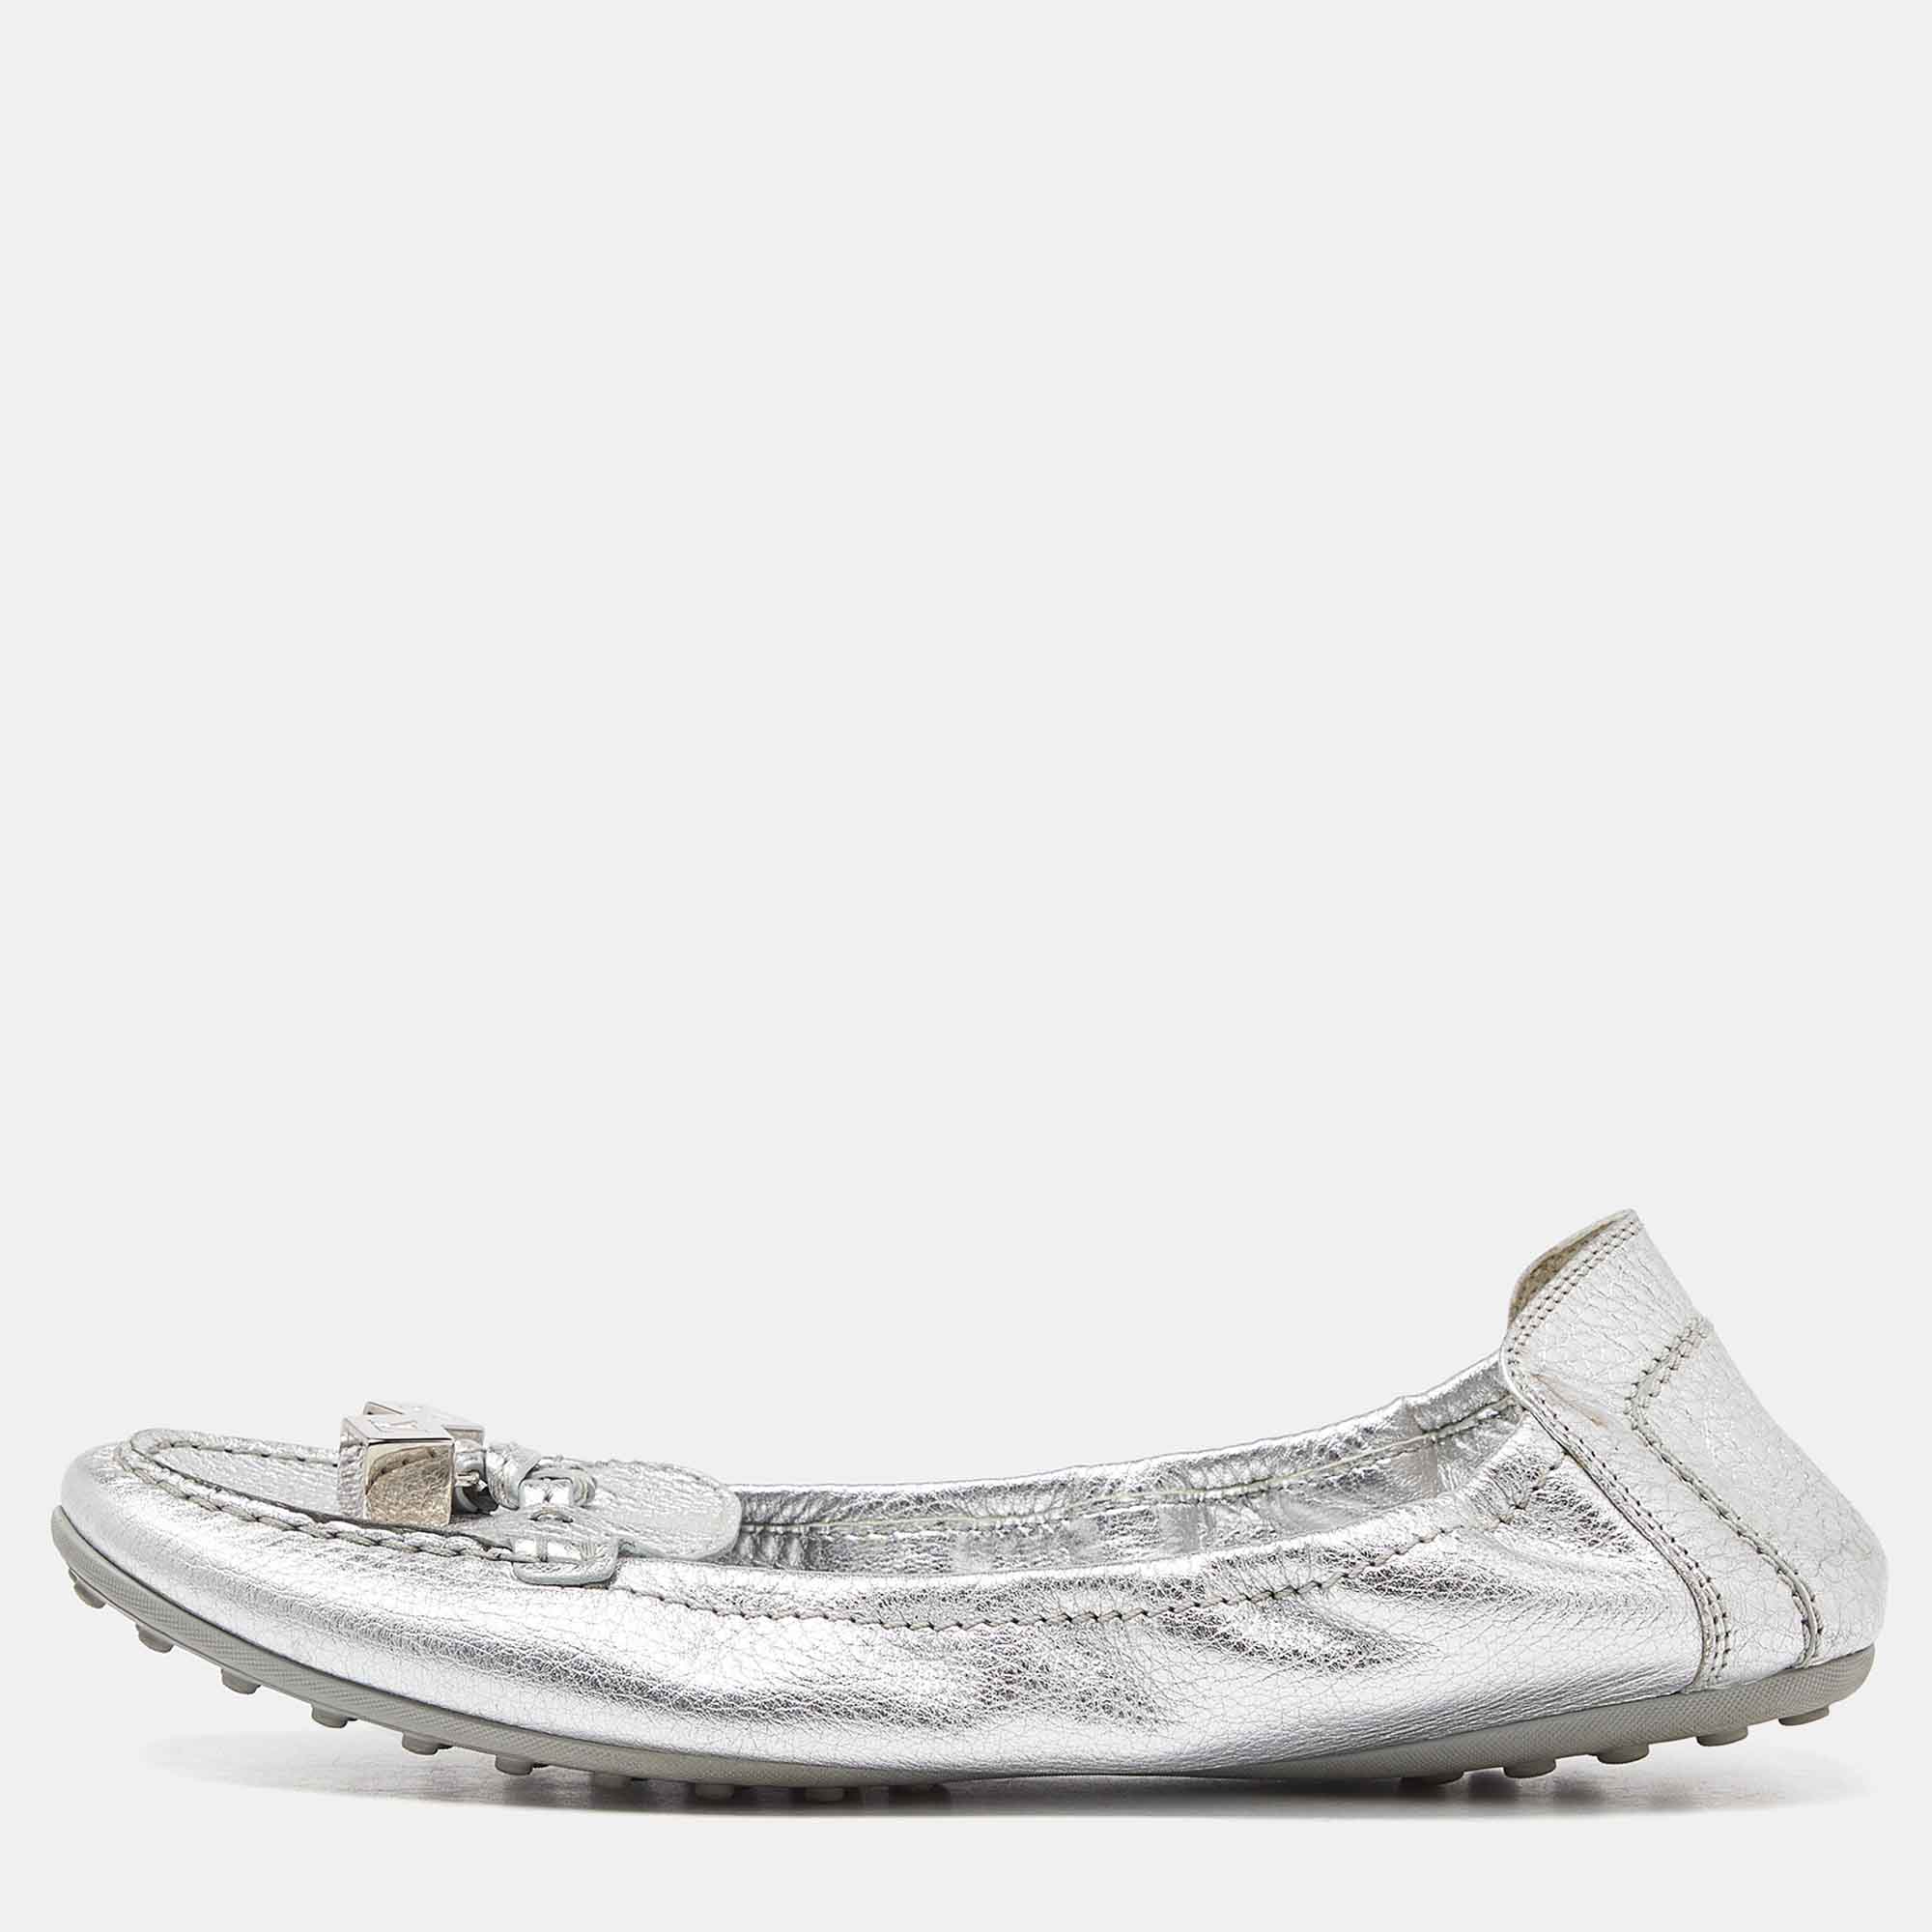 Louis vuitton silver leather dice scrunch loafer flats size 40.5